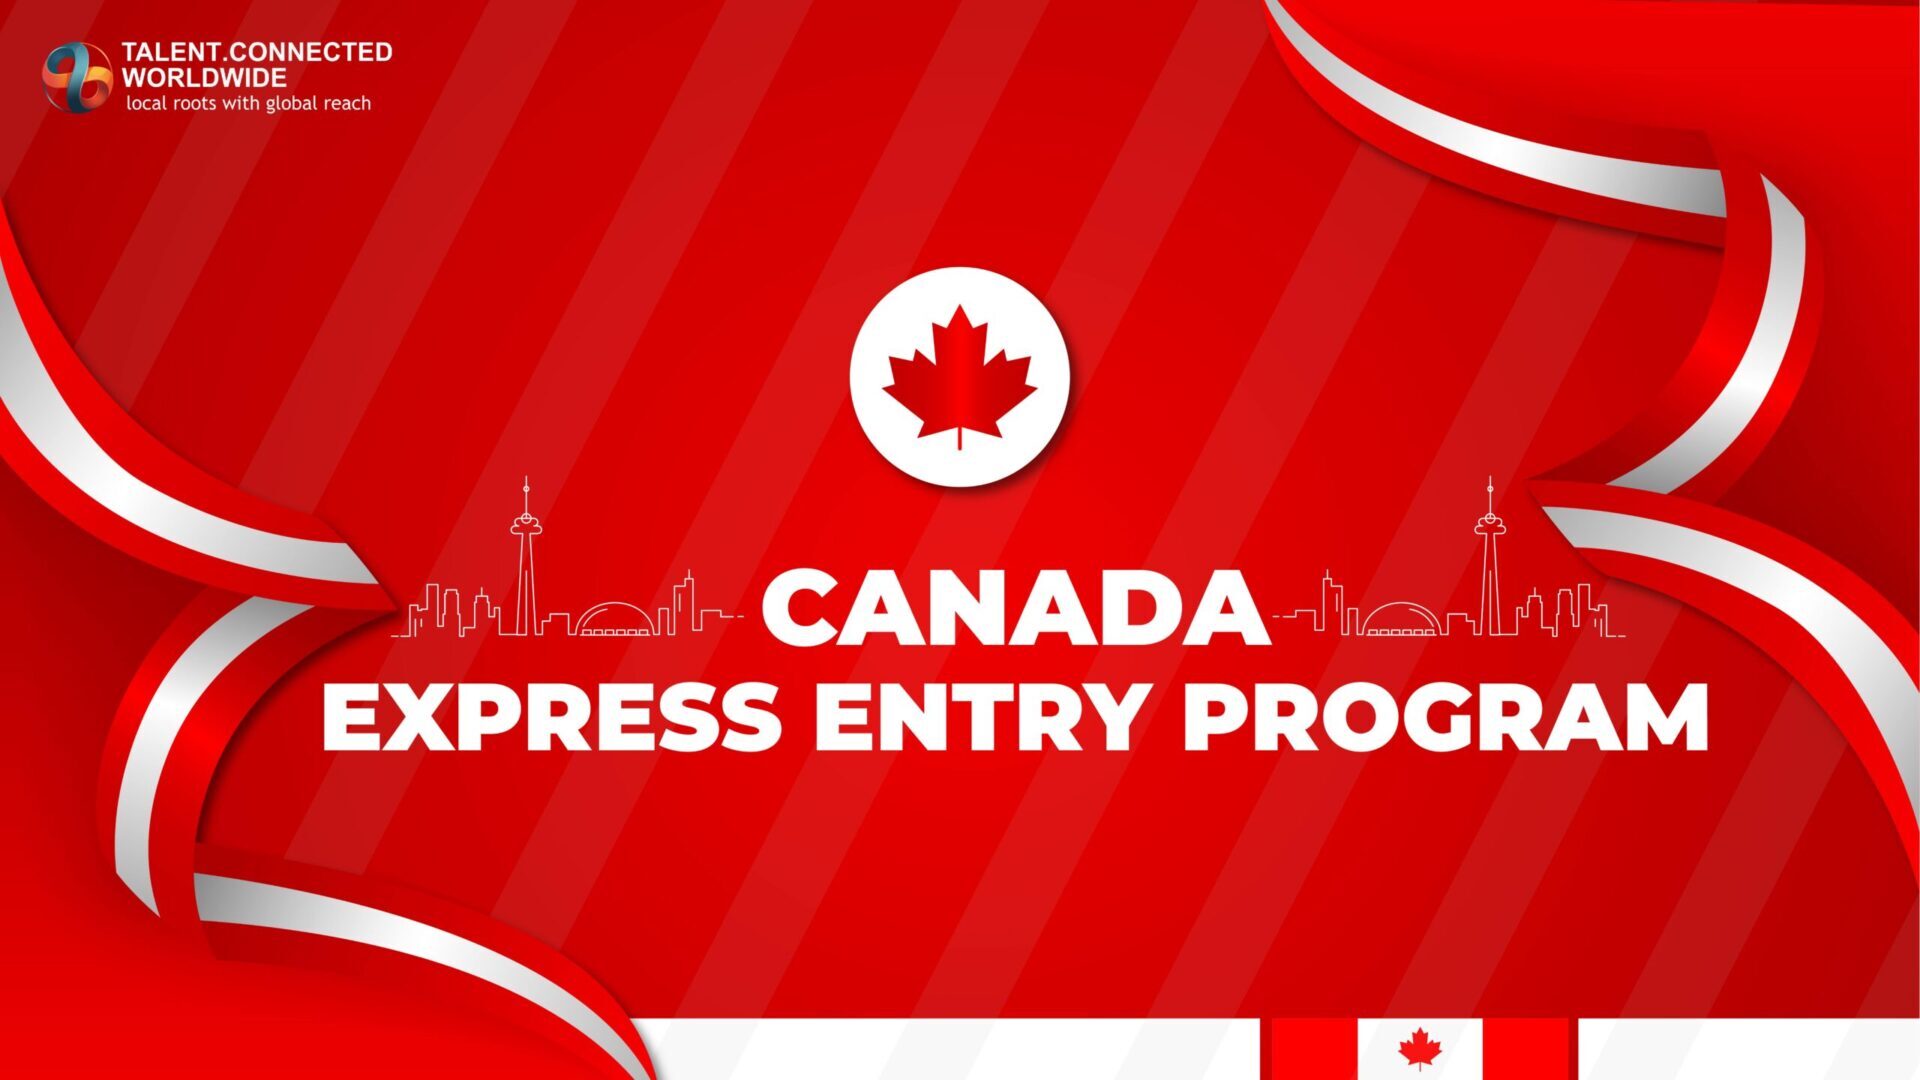 Canada Express Entry Program - The Entire Process